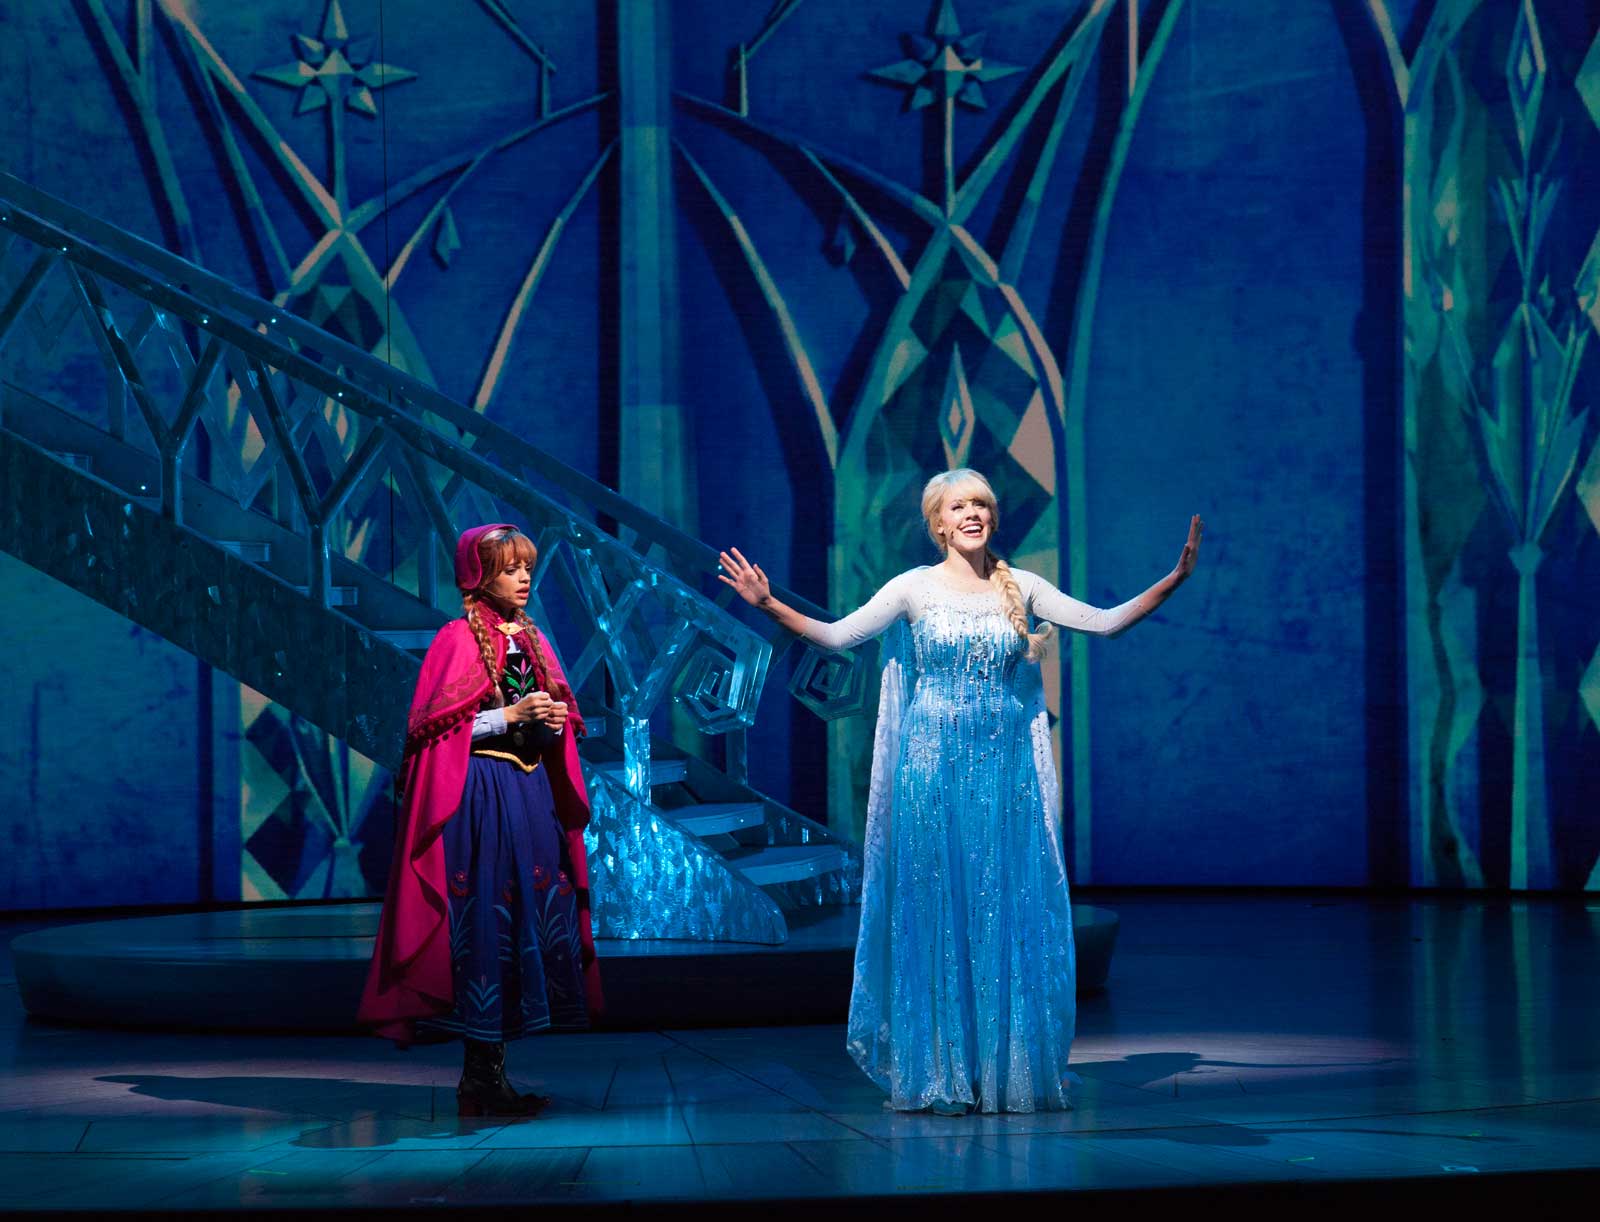 ANNA AND ELSA IN 'FROZEN - LIVE AT THE HYPERION' -- A new theatrical interpretation for the stage based on Disney's animated blockbuster film, Frozen is now playing at the Hyperion Theater at Disney California Adventure Park. The show immerses audiences in the emotional journey of Anna and Elsa with all of the excitement of live theater, including elaborate costumes and sets, stunning special effects and show-stopping production numbers. (Scott Brinegar/Disneyland Resort)